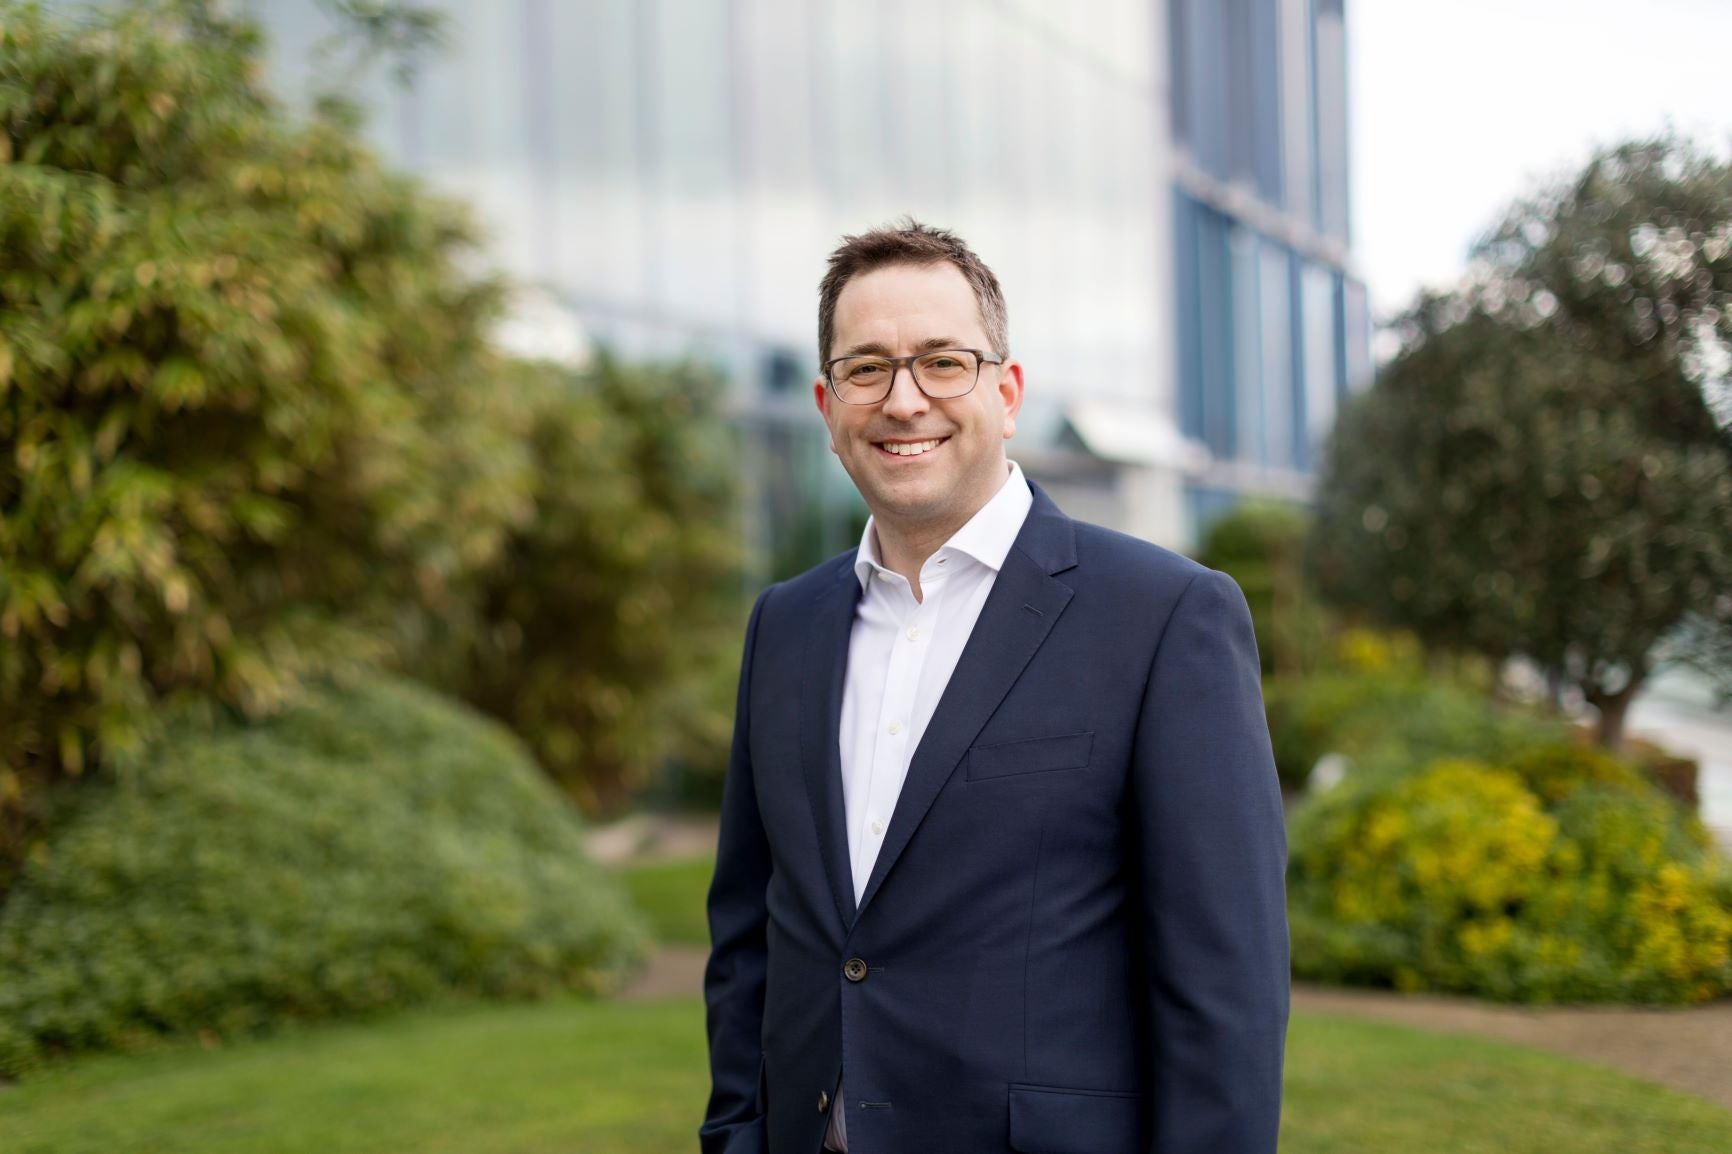 SSE Energy Services CIO Outlines Importance of Connectivity During Lock Down